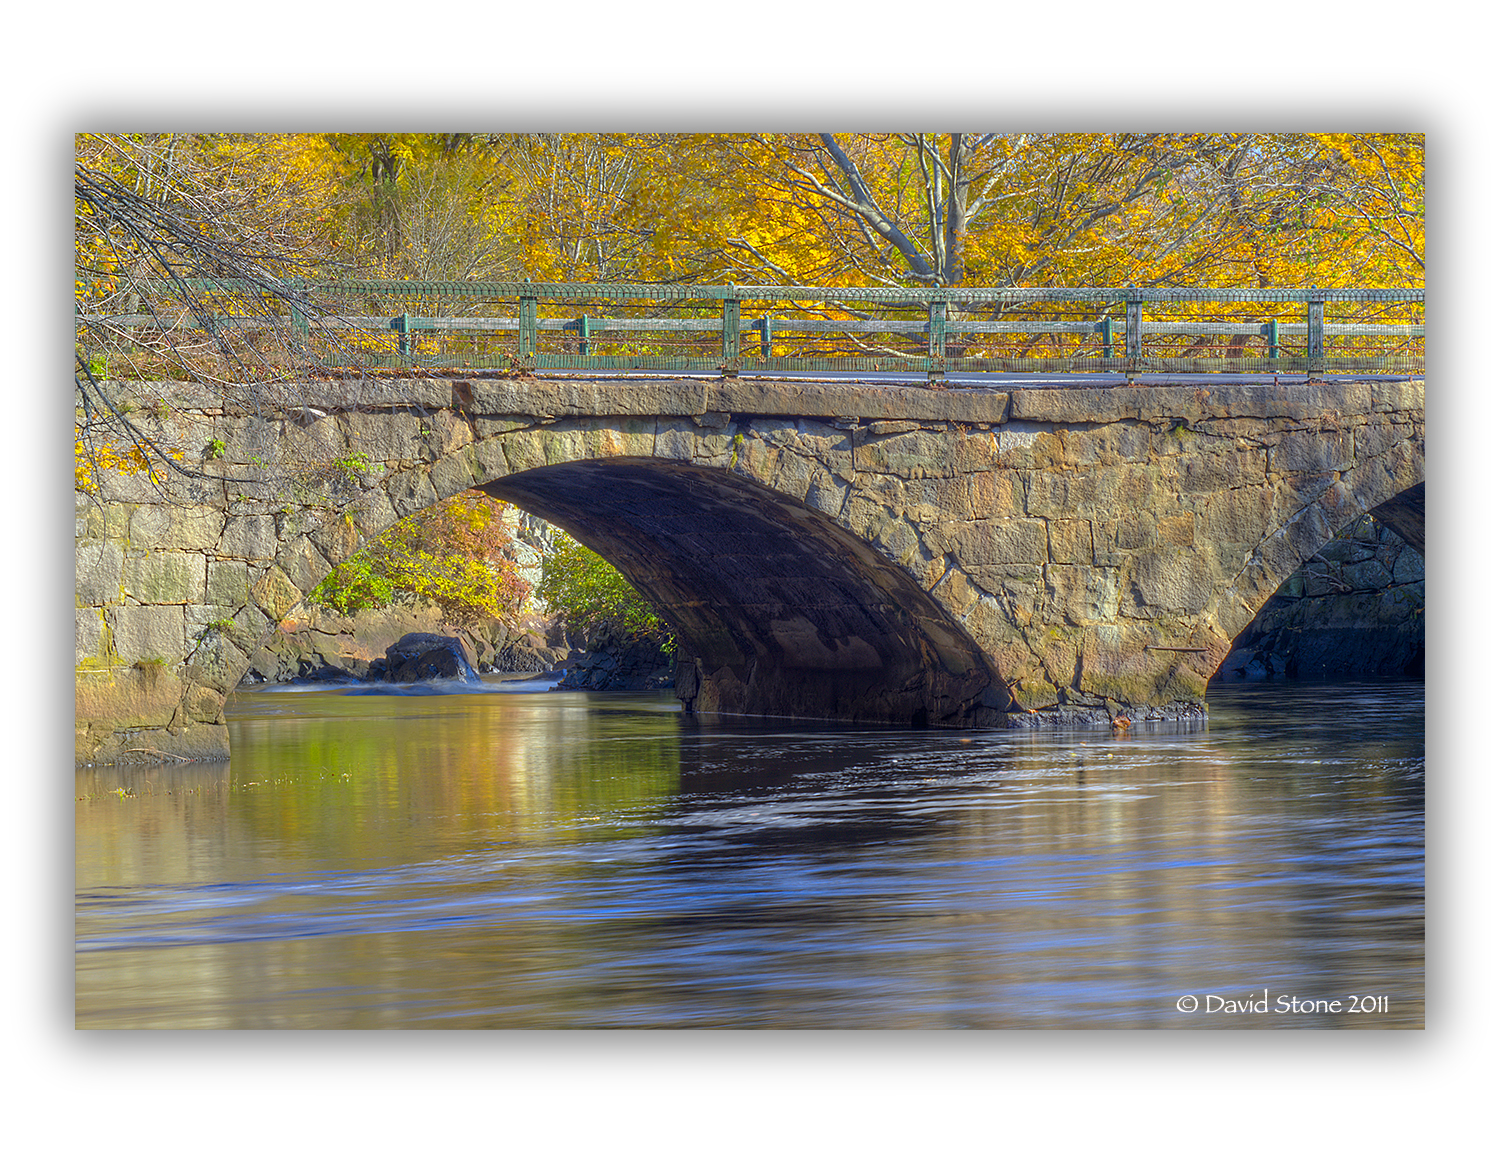 County Street Bridge Over The Ipswich River (user submitted)